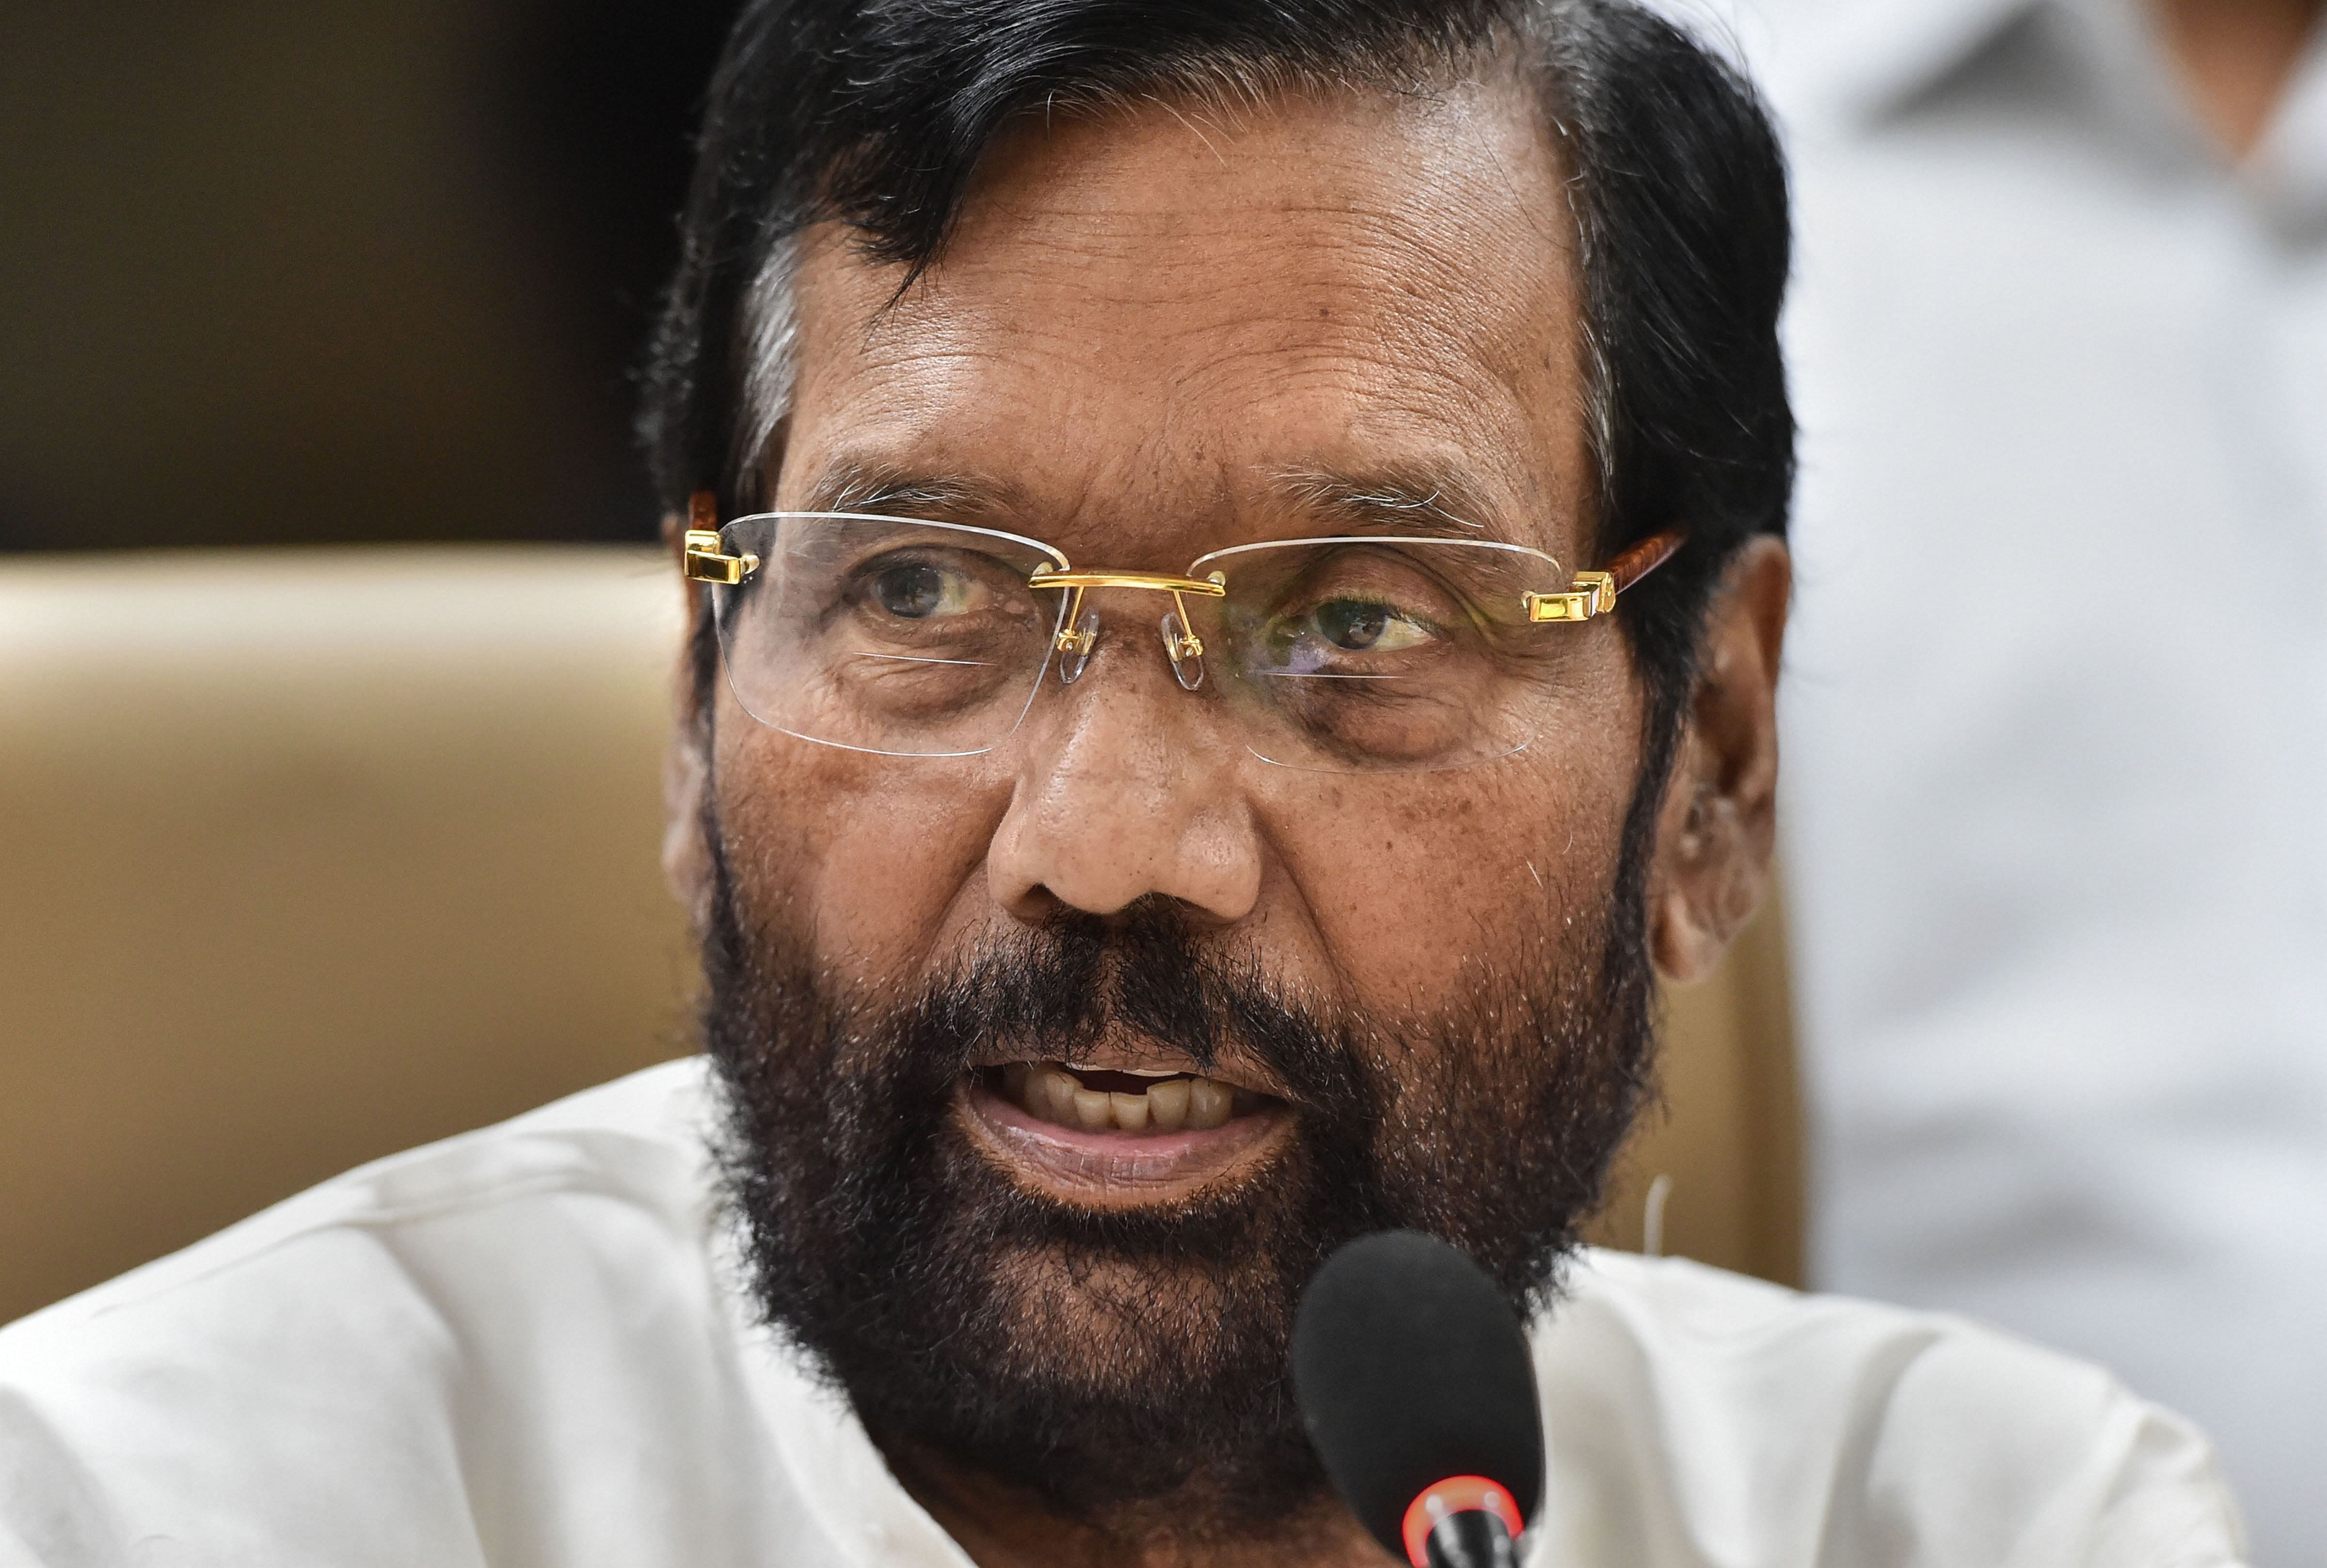 Minister for Consumer Affairs, Food and Public Distribution Ram Vilas Paswan addresses a press conference announcing the manufacturing of bulletproof jackets as per Bureau of Indian Standard (BIS), in New Delhi. (PTI Photo)